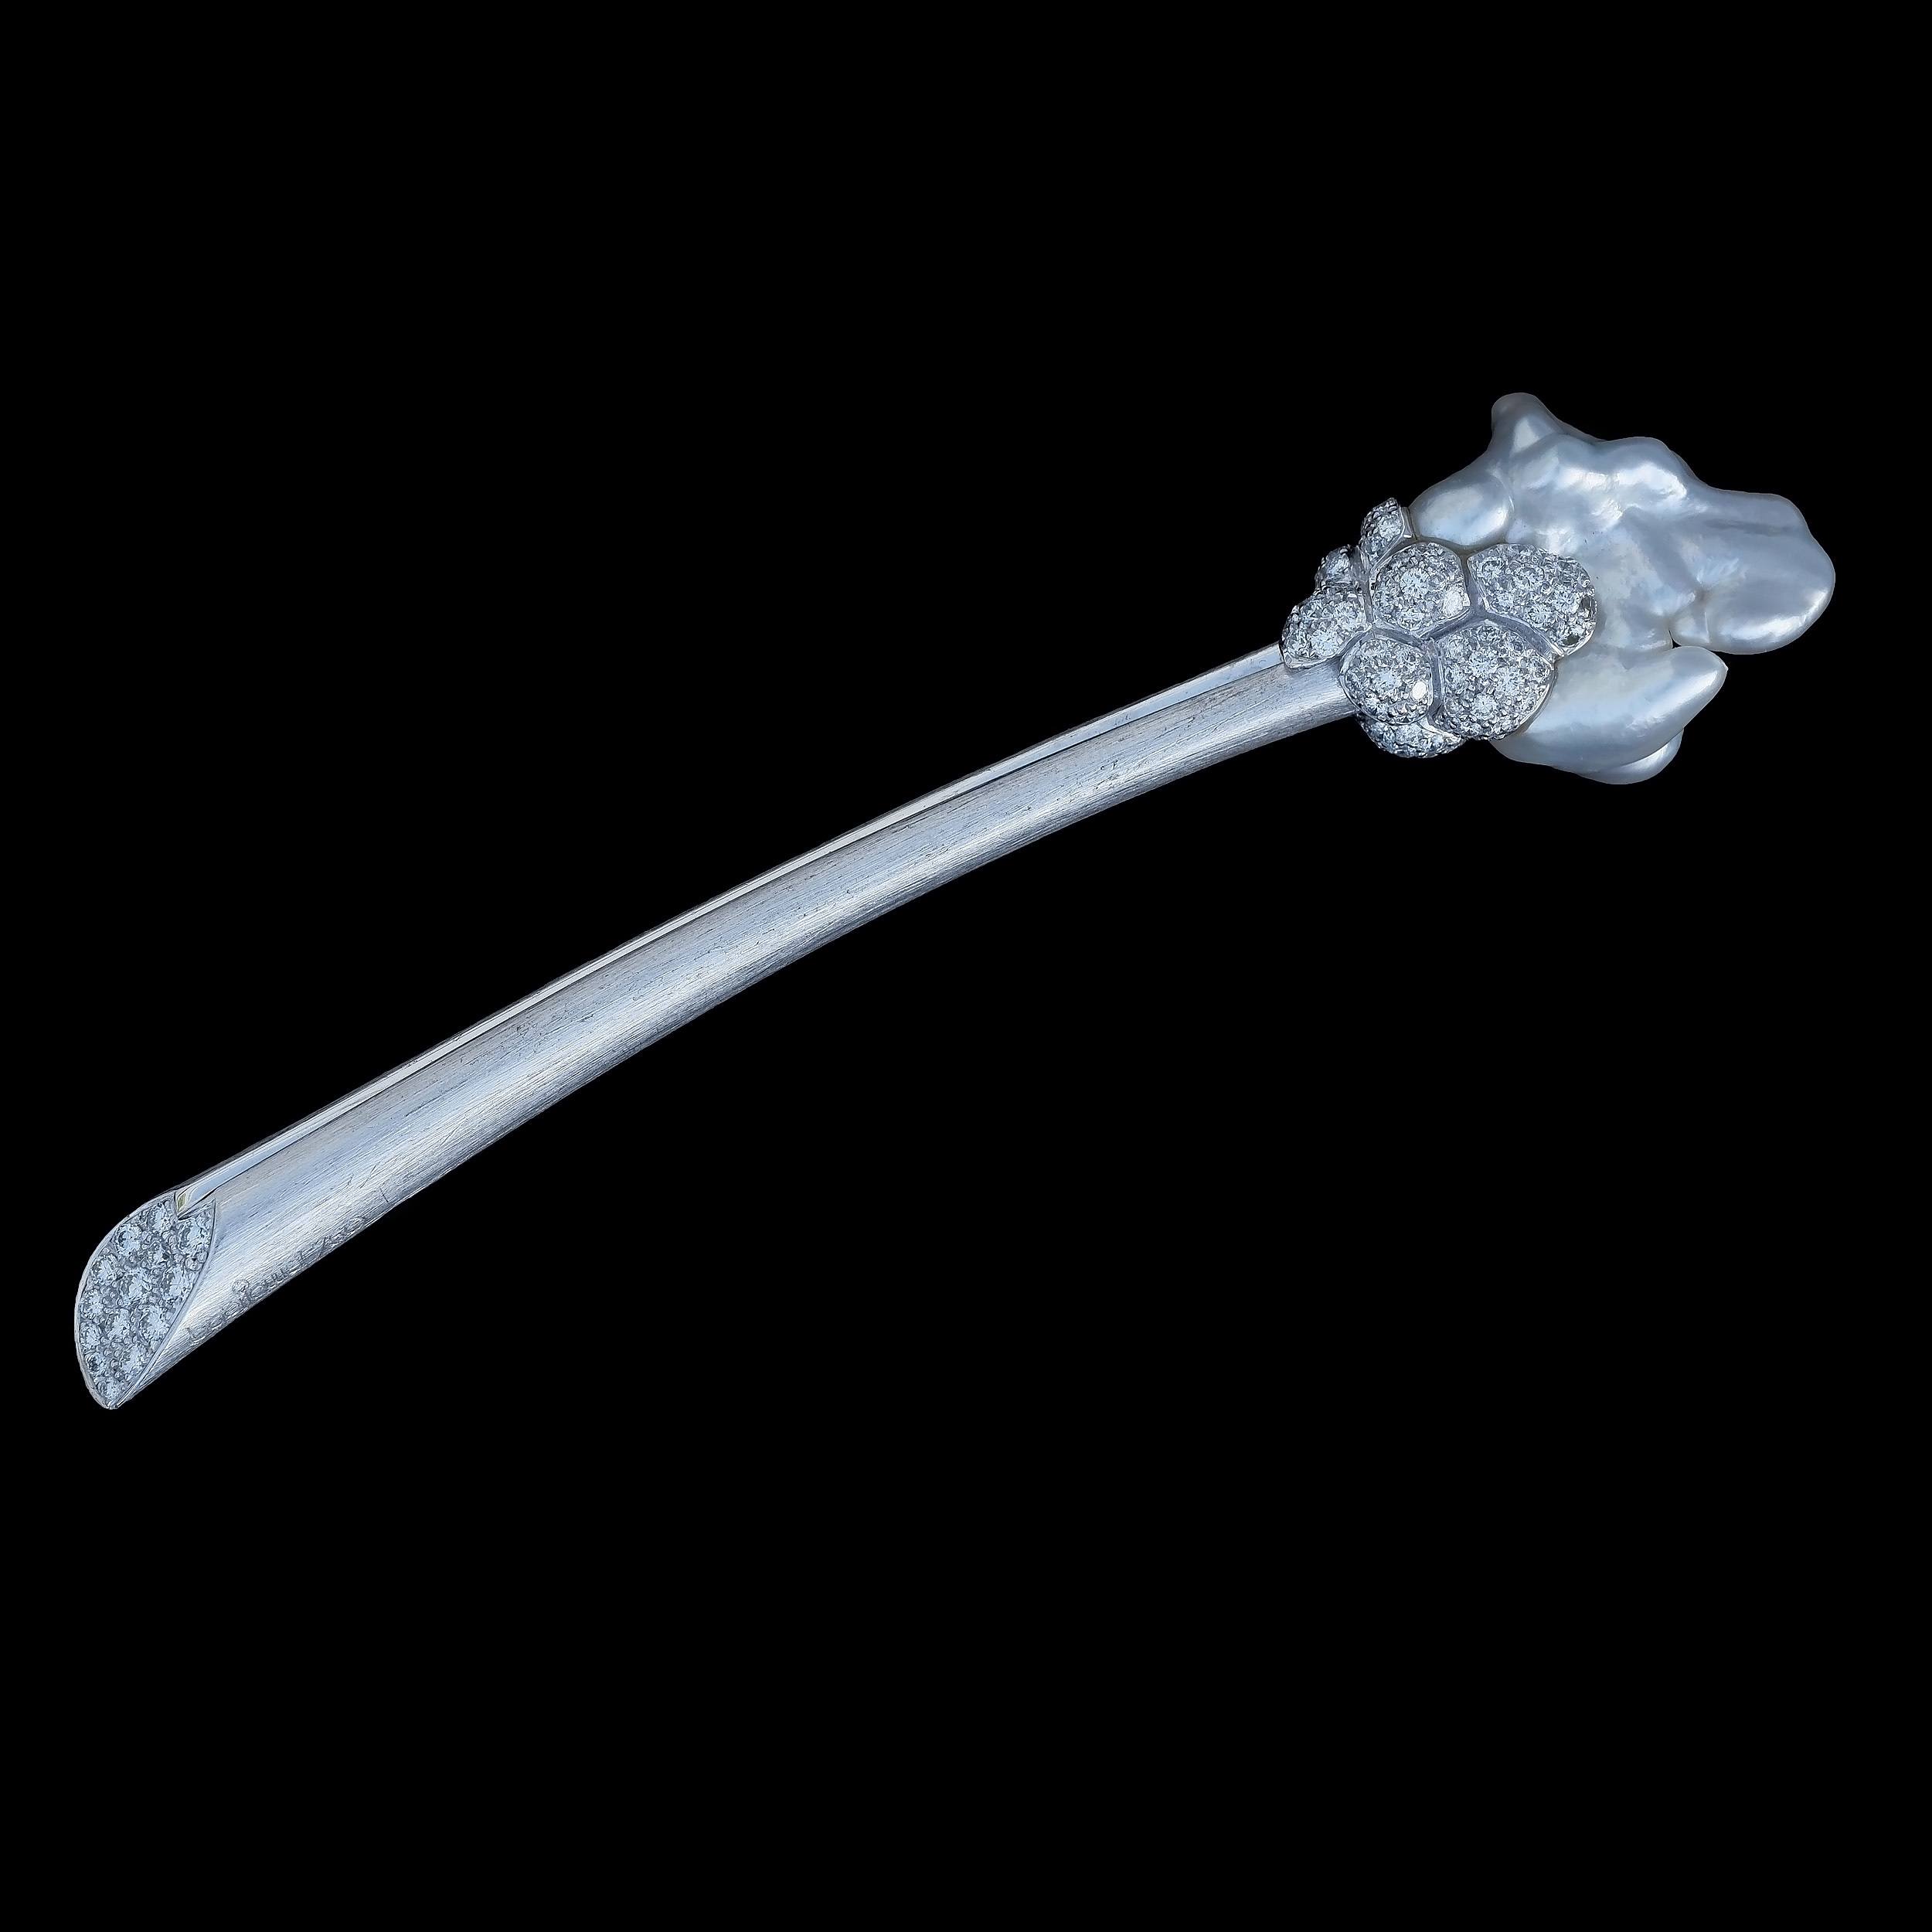 'A Large and Magnificent C.A. Bochert 18ct White Gold, Diamond and Large Free Form Keshi Pearl Brooch Circa 2000'